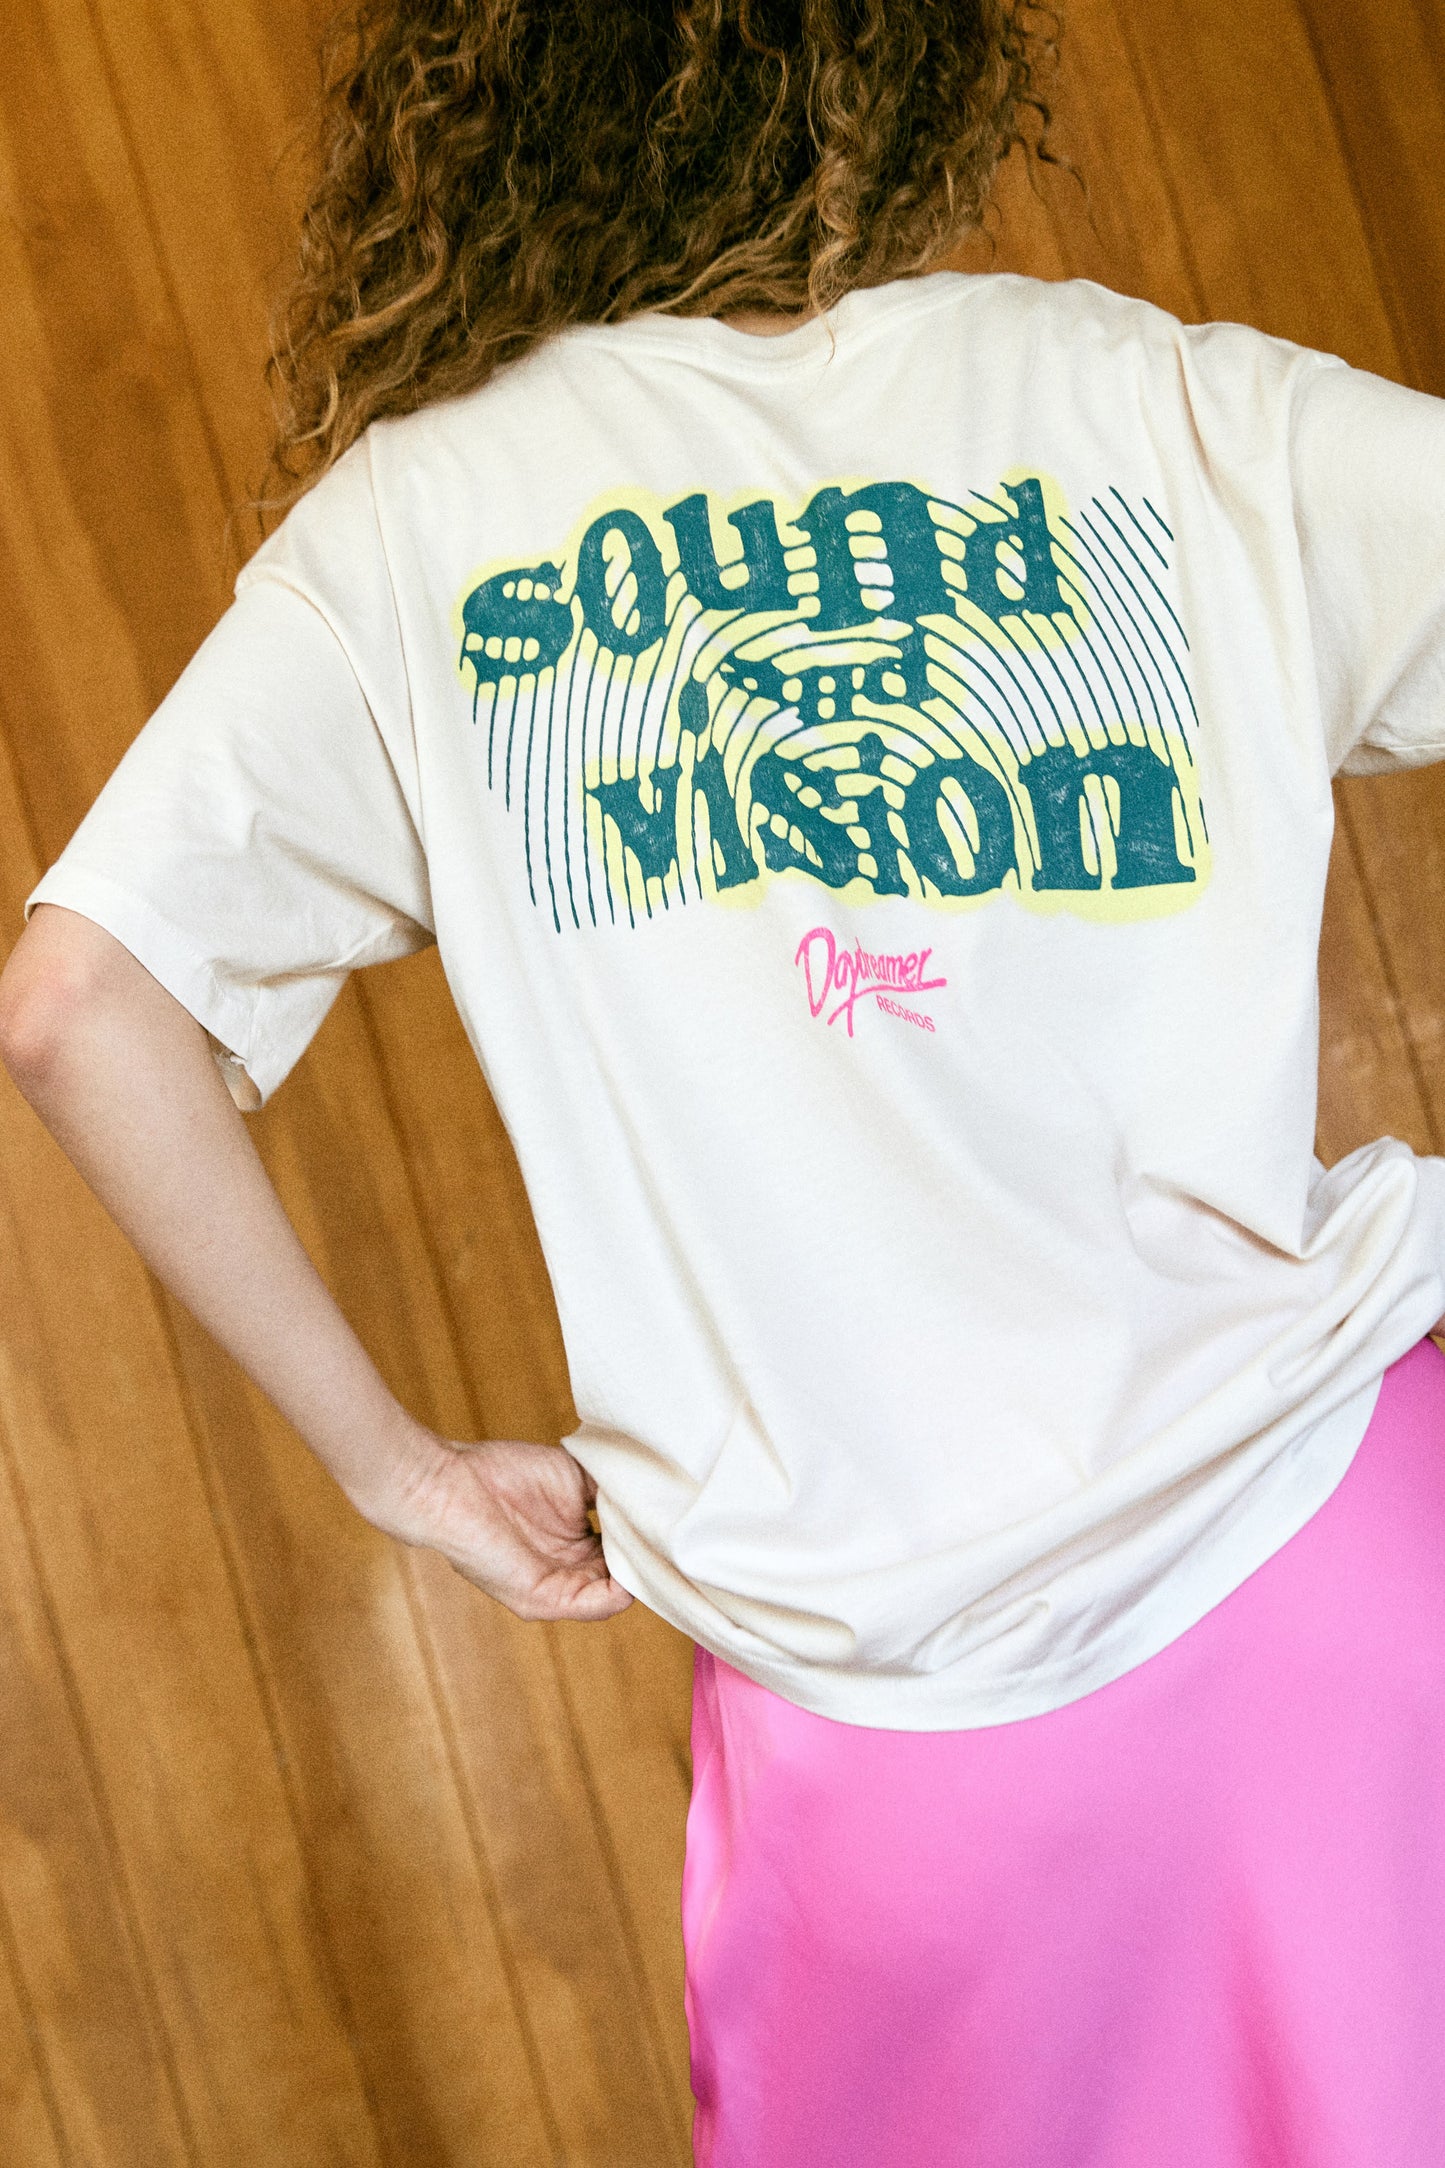 A curly-haired model featuring a white tee stamped with 'daydreamer' and 'sound waves' at the back. It is also designed with pink and yellow graphics.